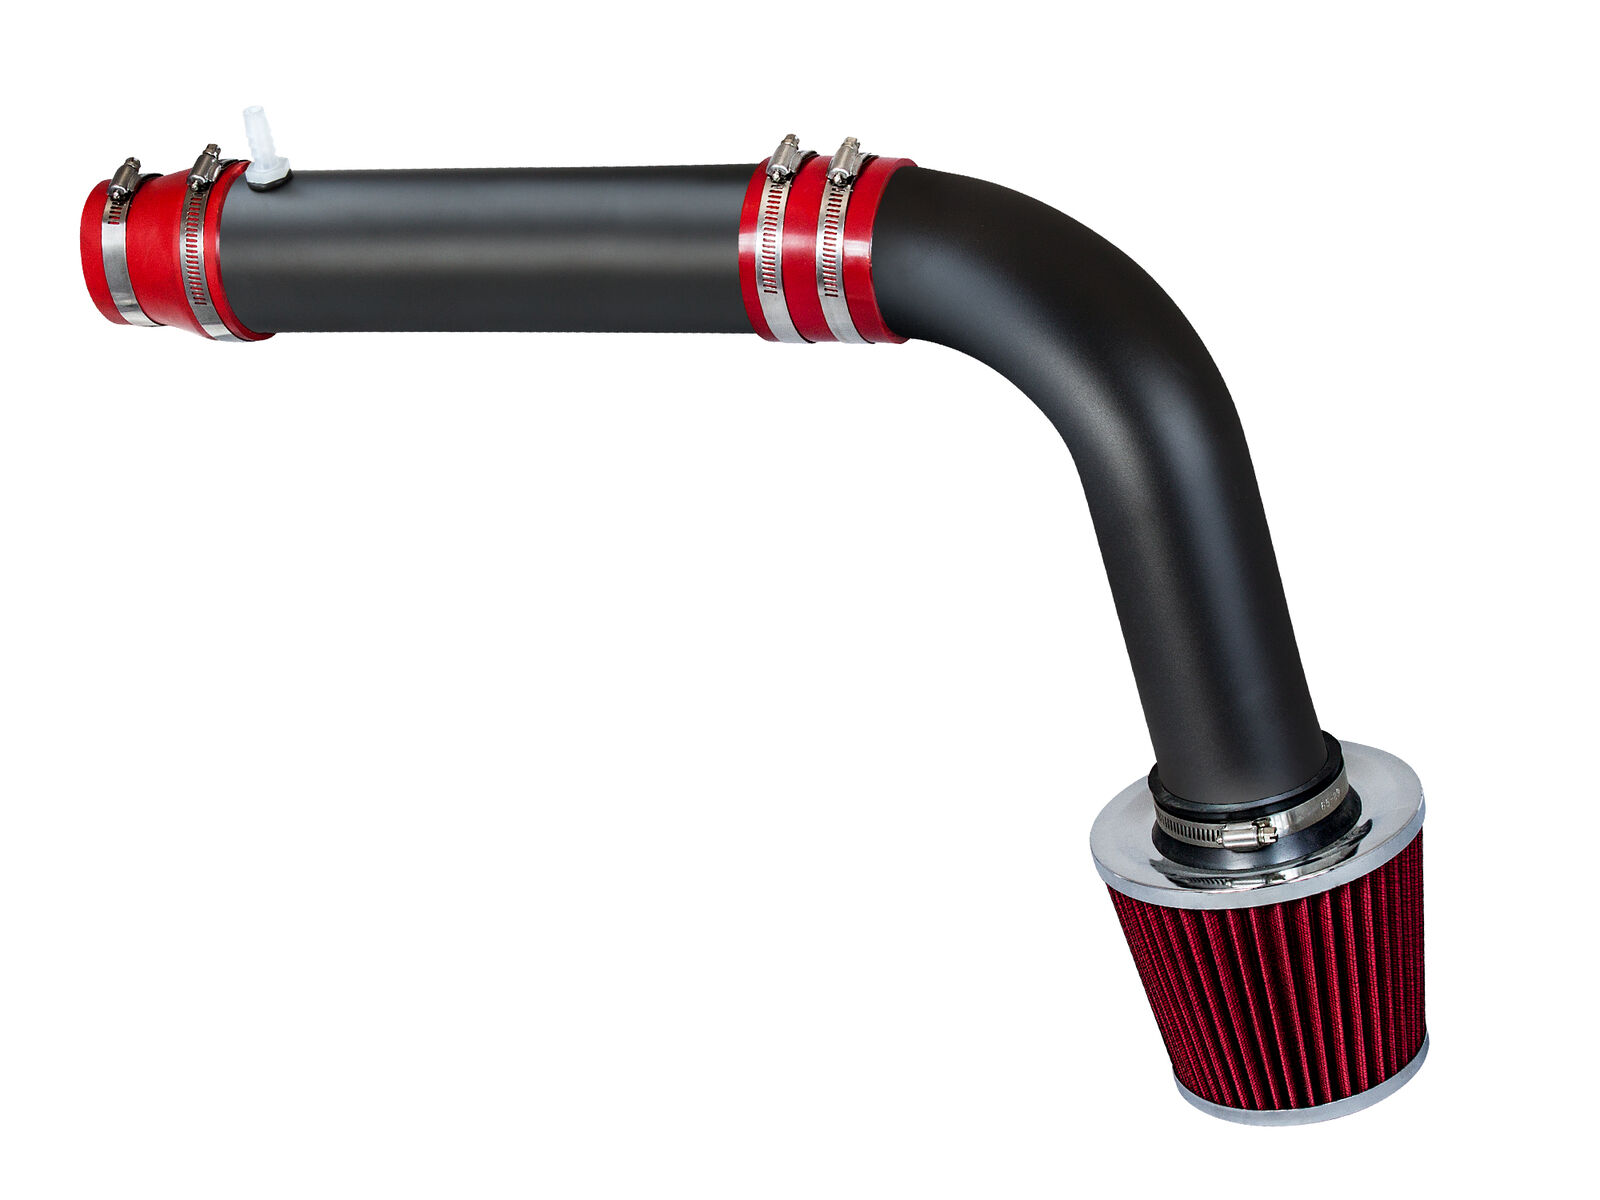 RW RED Sport Cold Air Intake Kit+Filter For 2011-2017 Veloster Accent 1.6L GDi